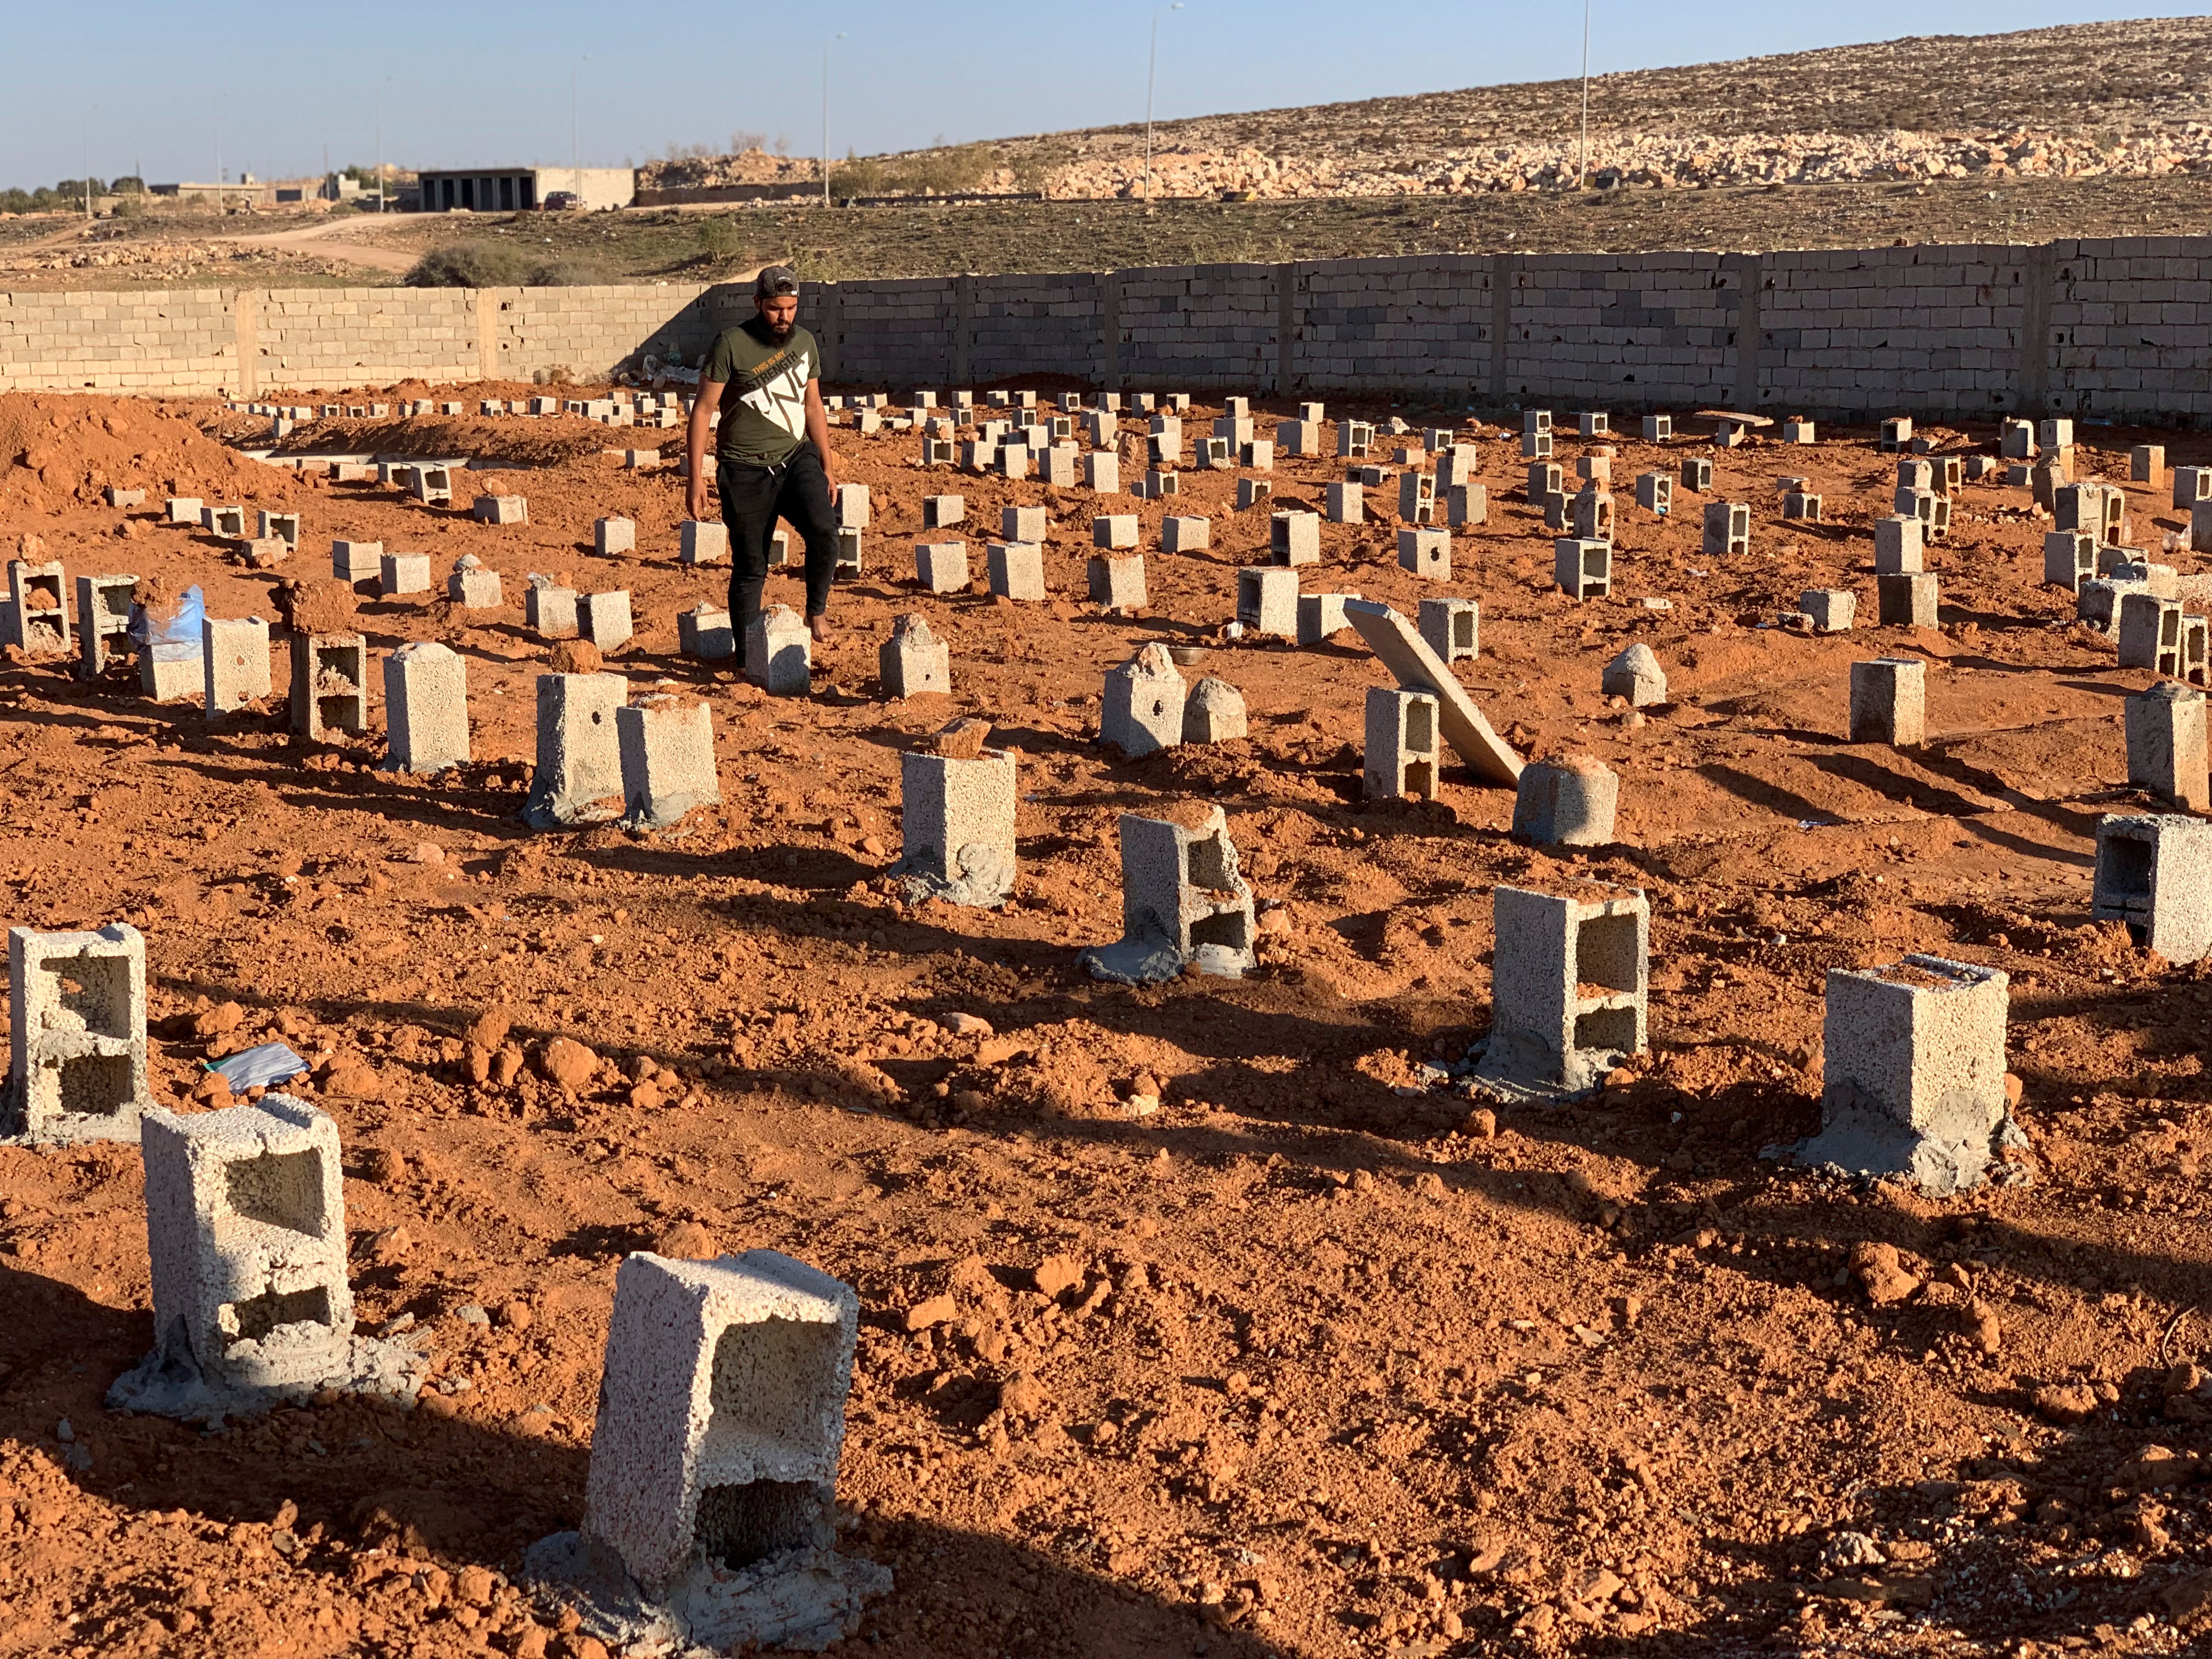 Graves of flash flood victims in Derna on Friday, marked with pieces of rubble